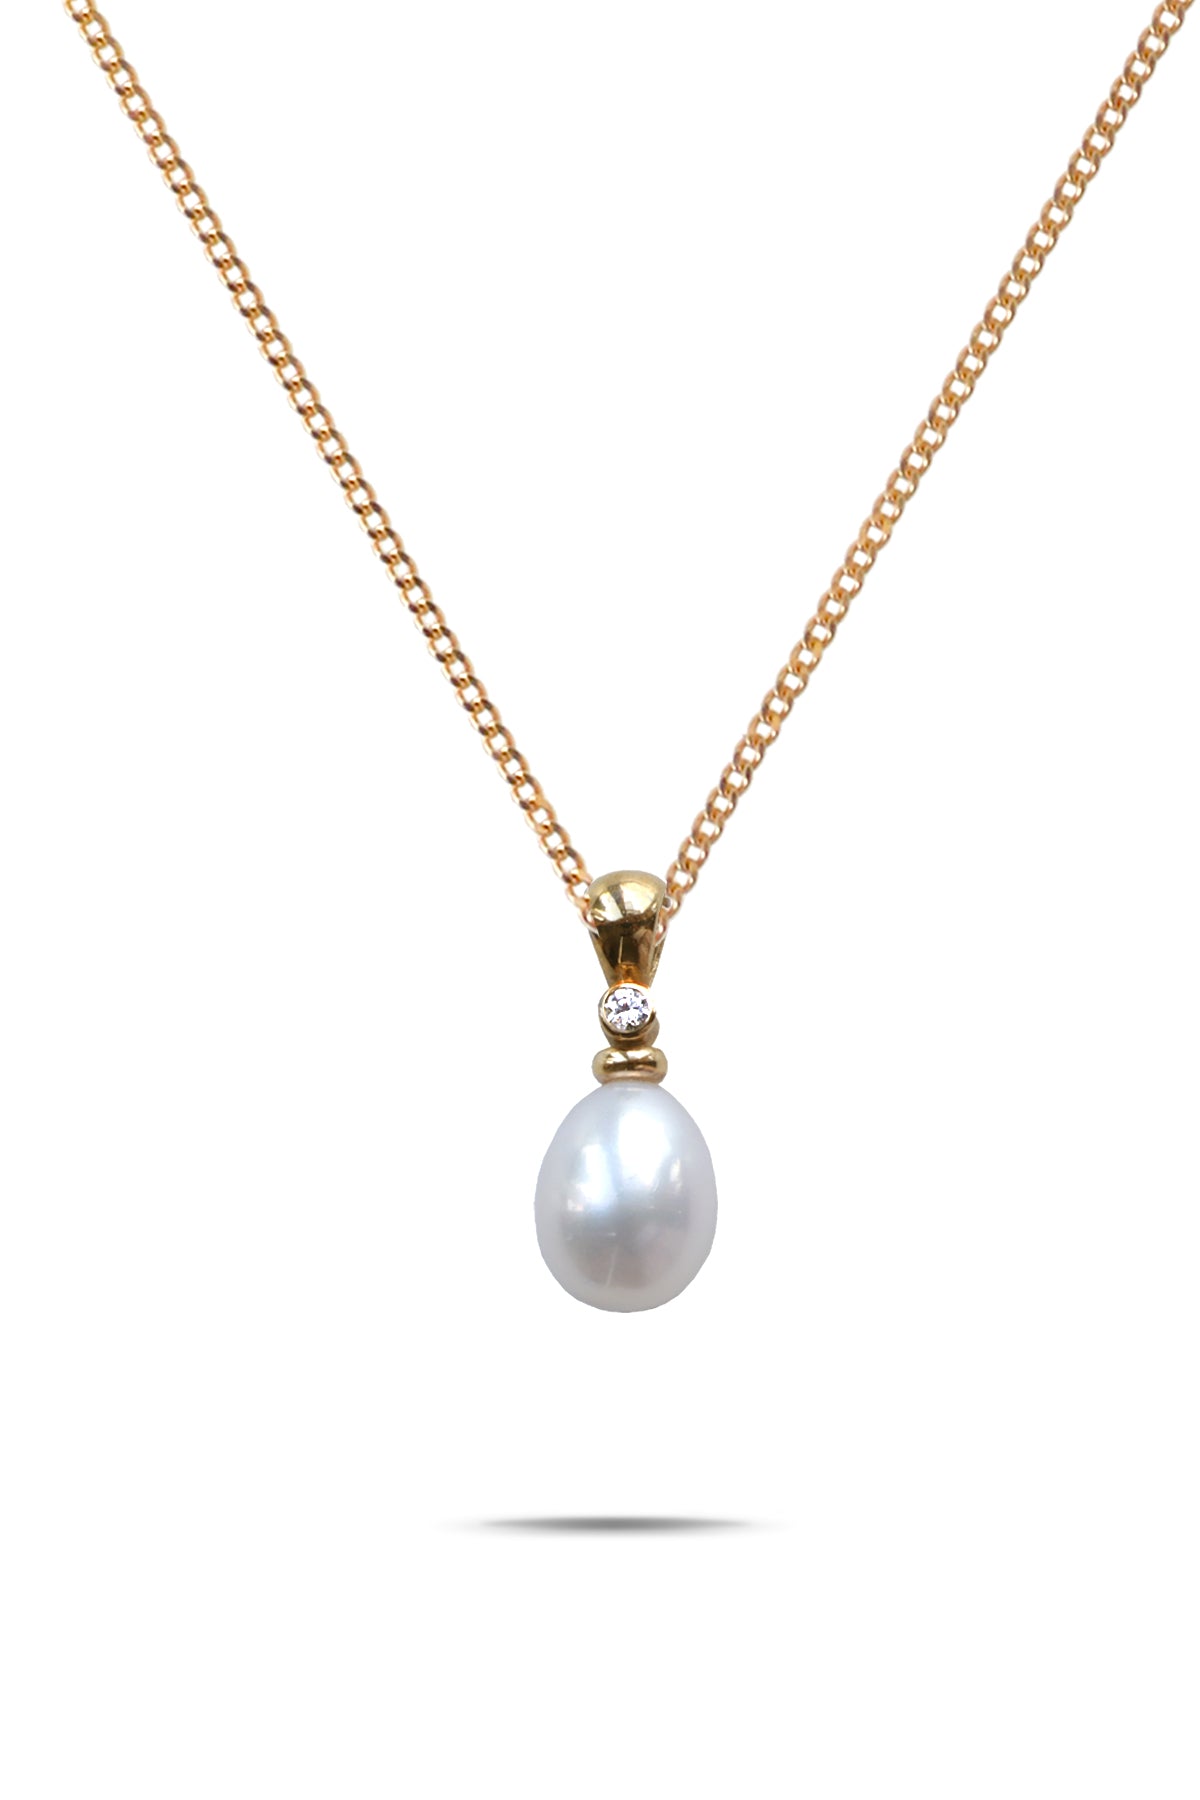 Buy 9ct Gold Pearl Chain Necklace Floating Pearl Necklace Necklace Gold  Jewelry Gold 9ct Gold Necklace Charm Necklace I3CN-3016 Online in India -  Etsy